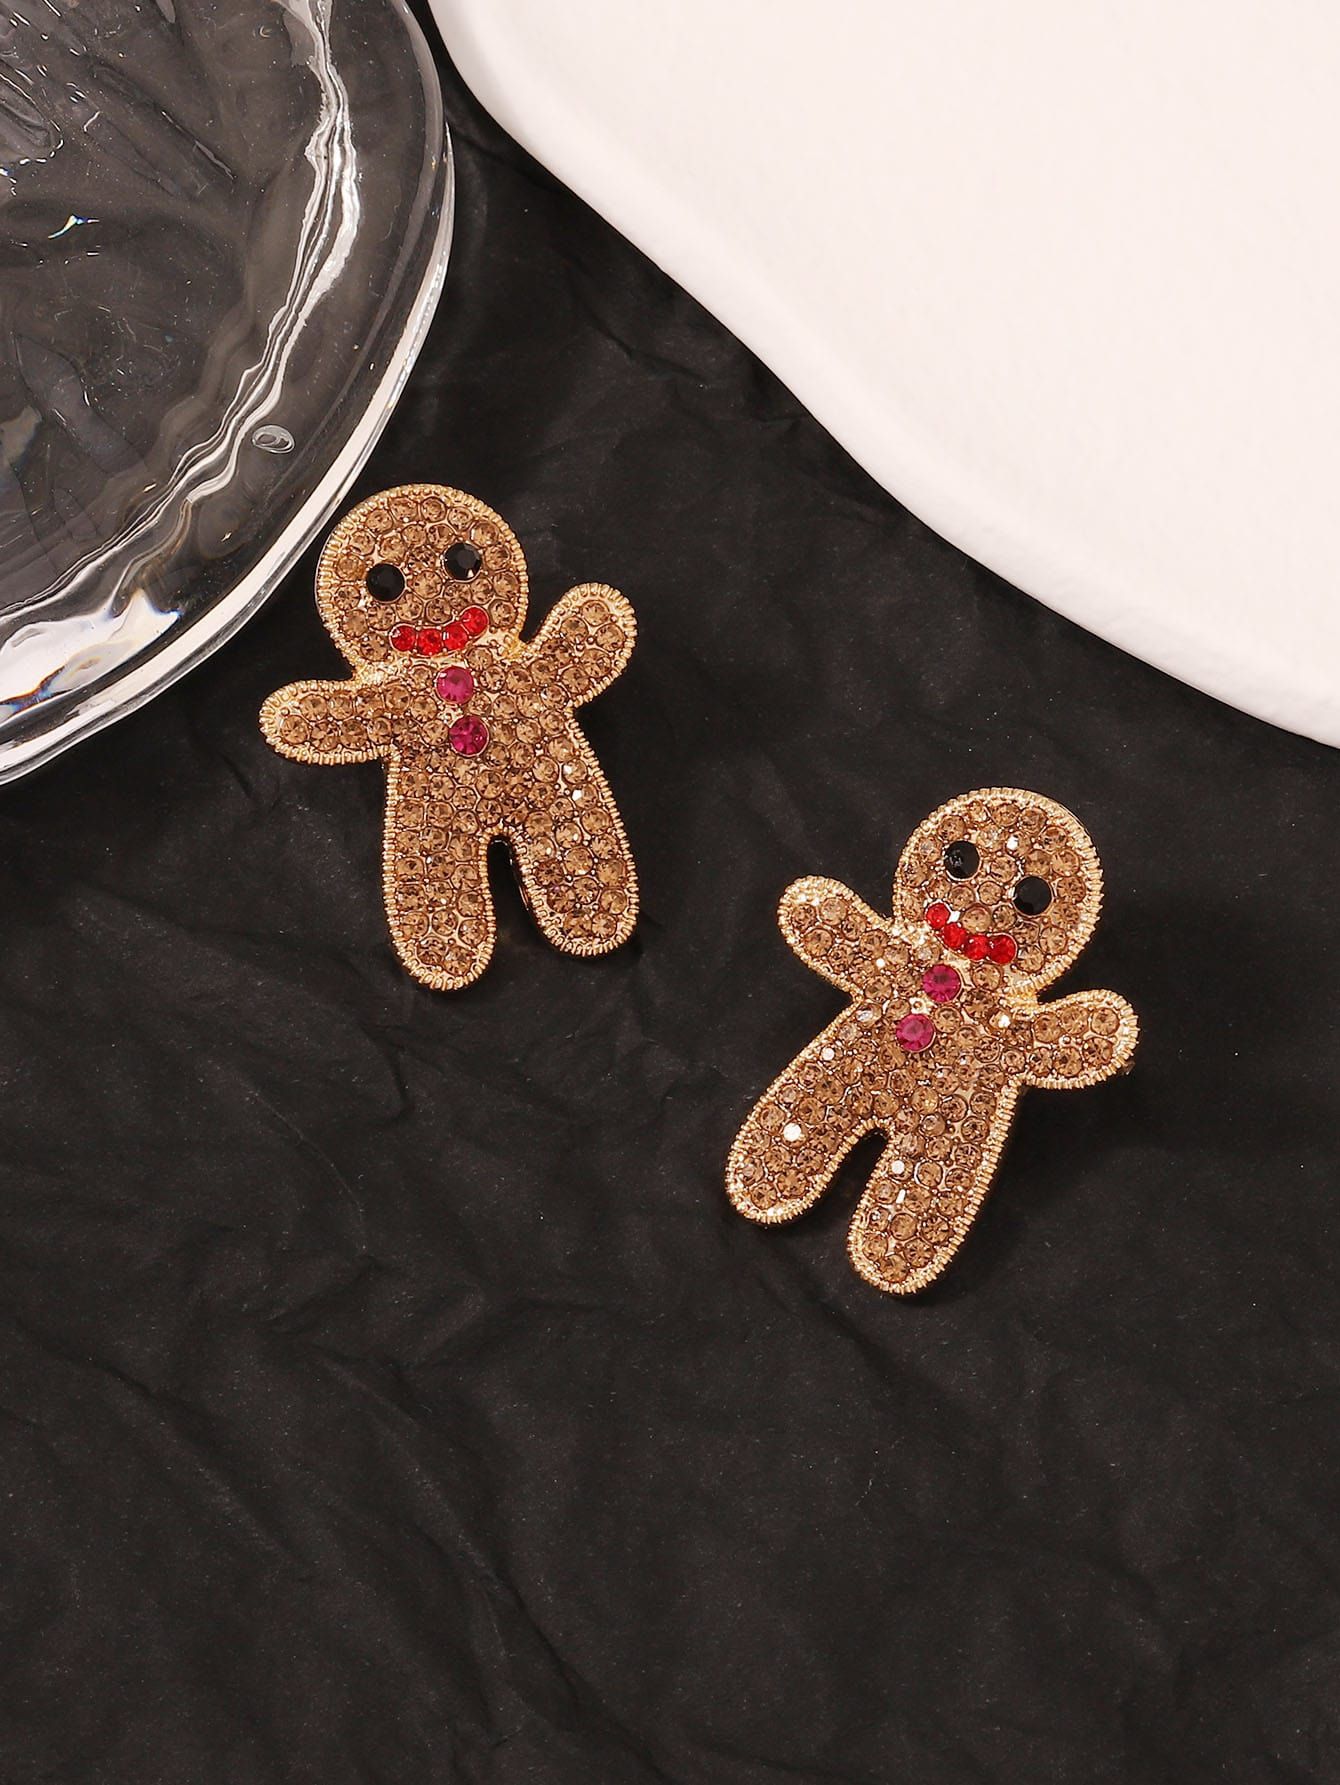 1 pair of casual style gingerbread Man holiday fashion earrings for women Christmas gift | SHEIN